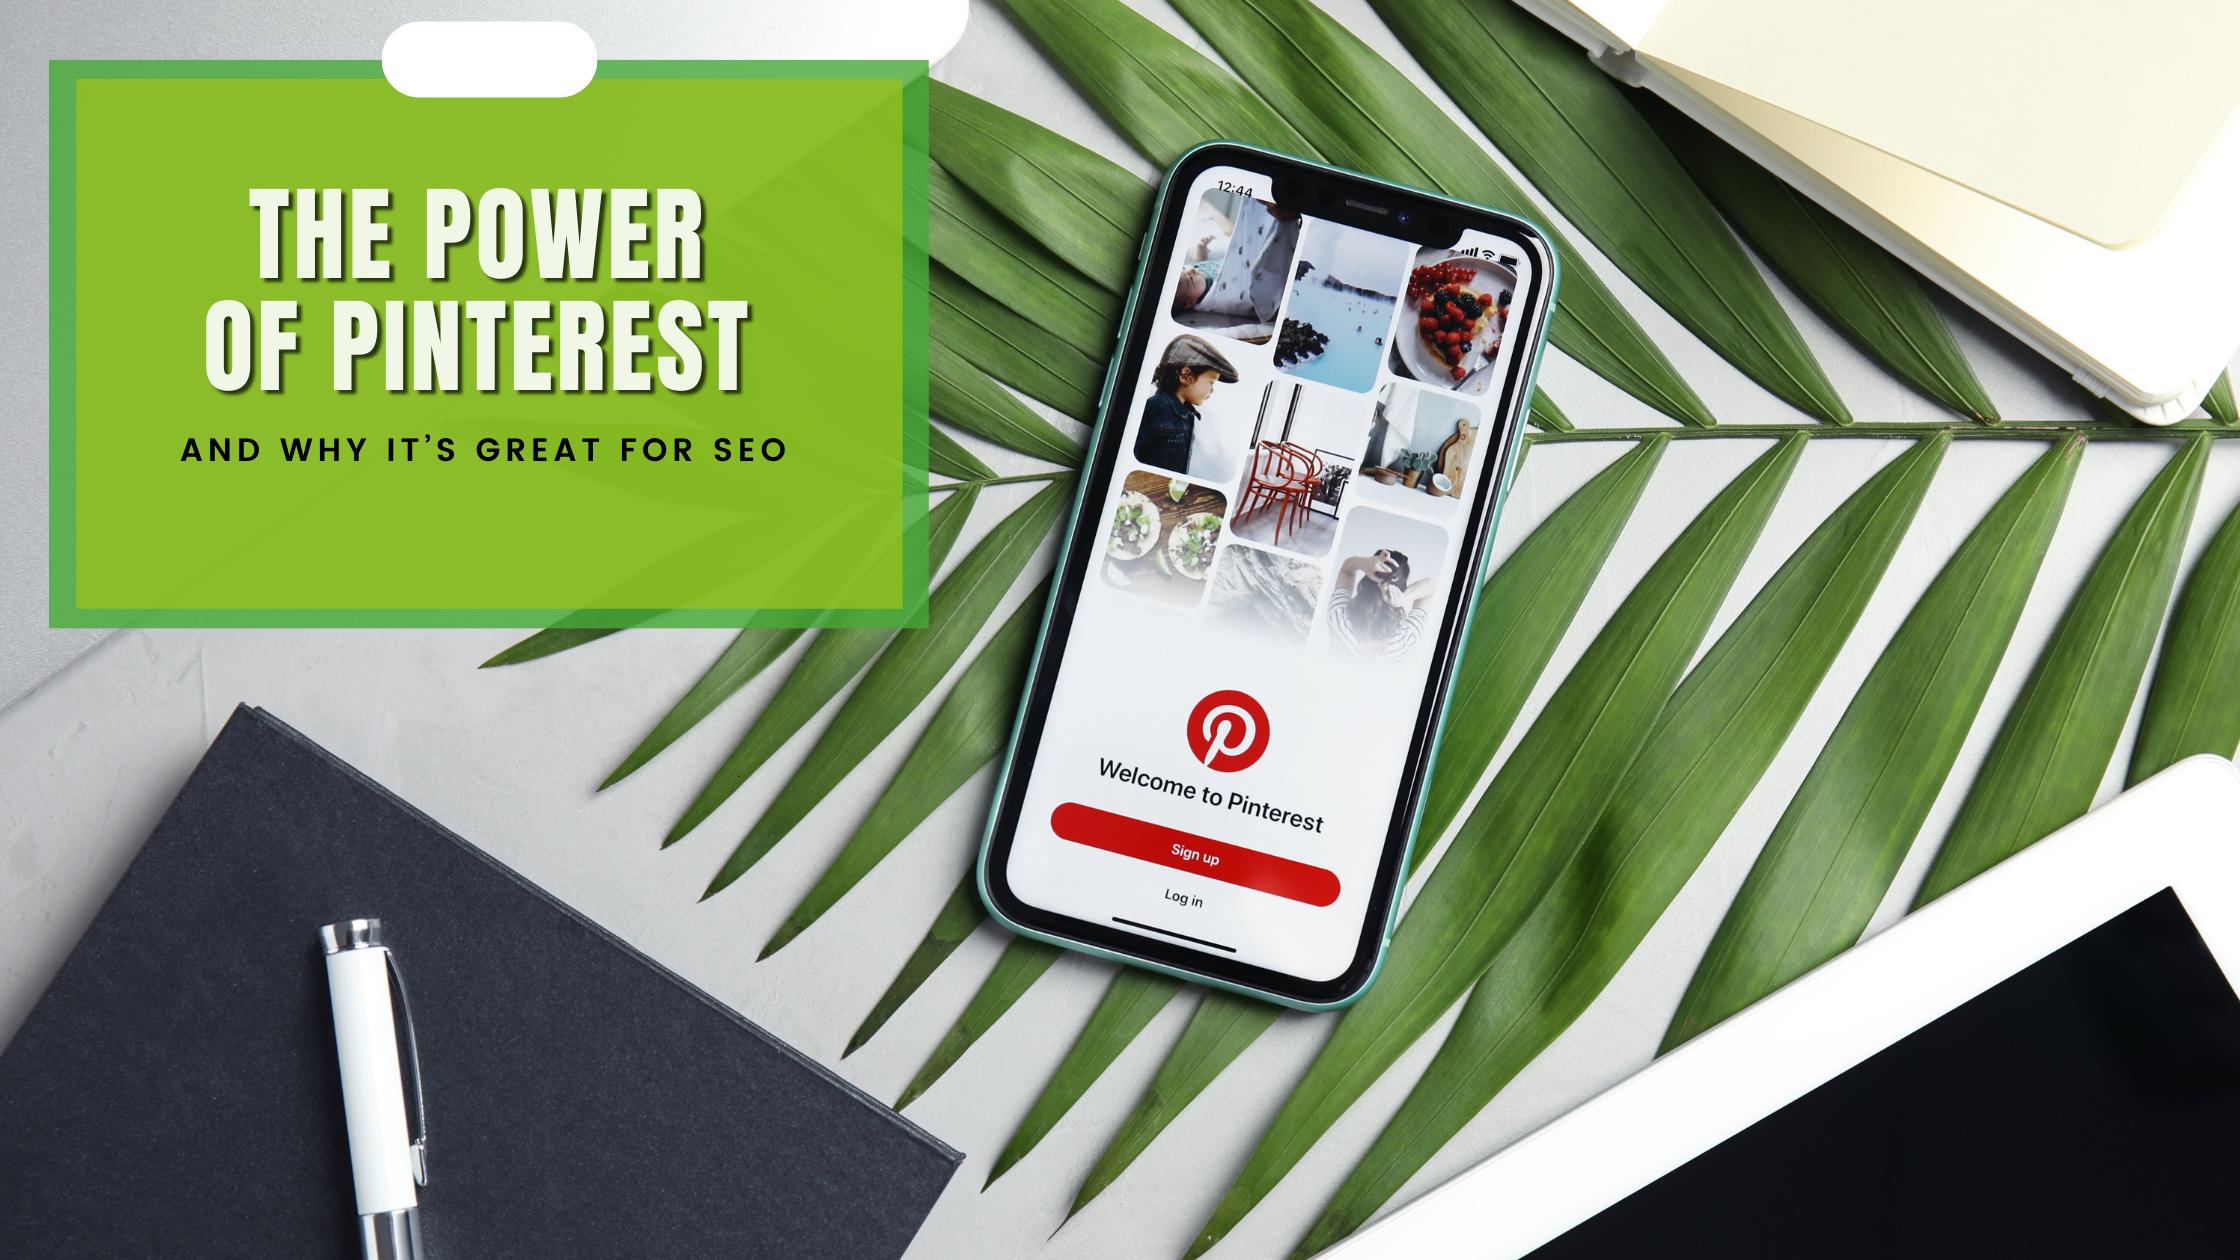 The Power Of Pinterest To Grow Your Business